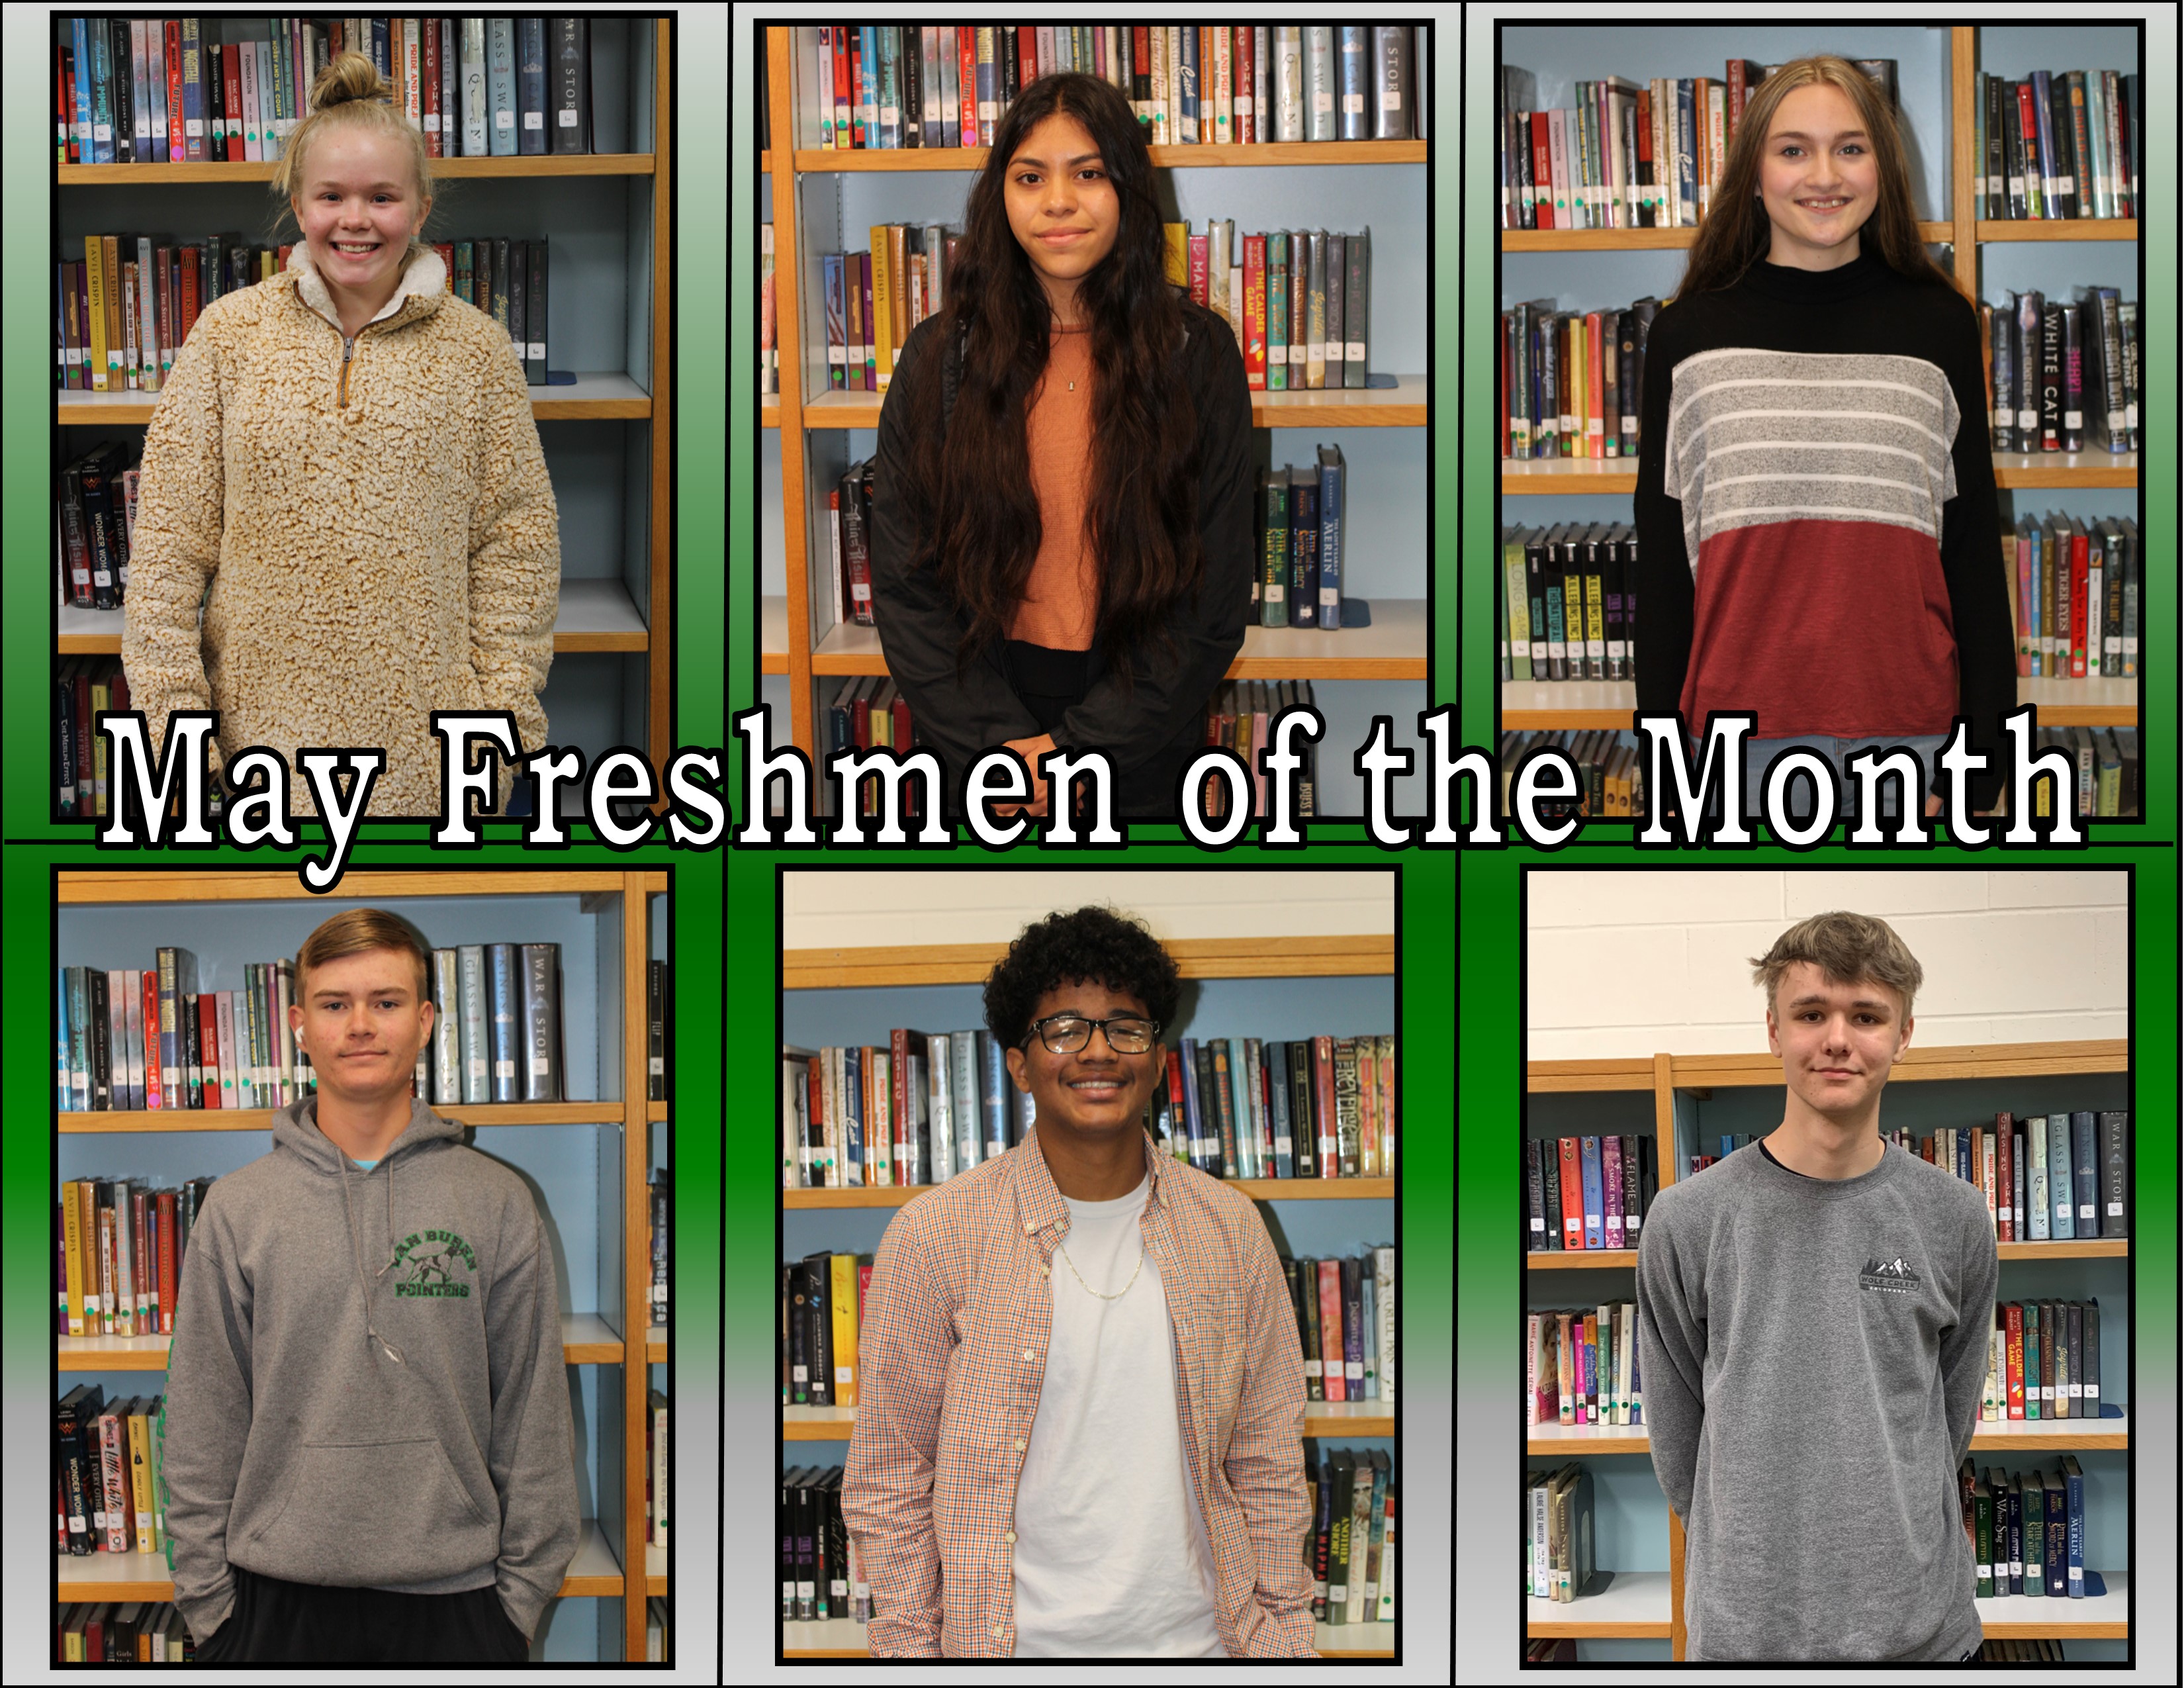 Congratulations May Freshmen of the Month